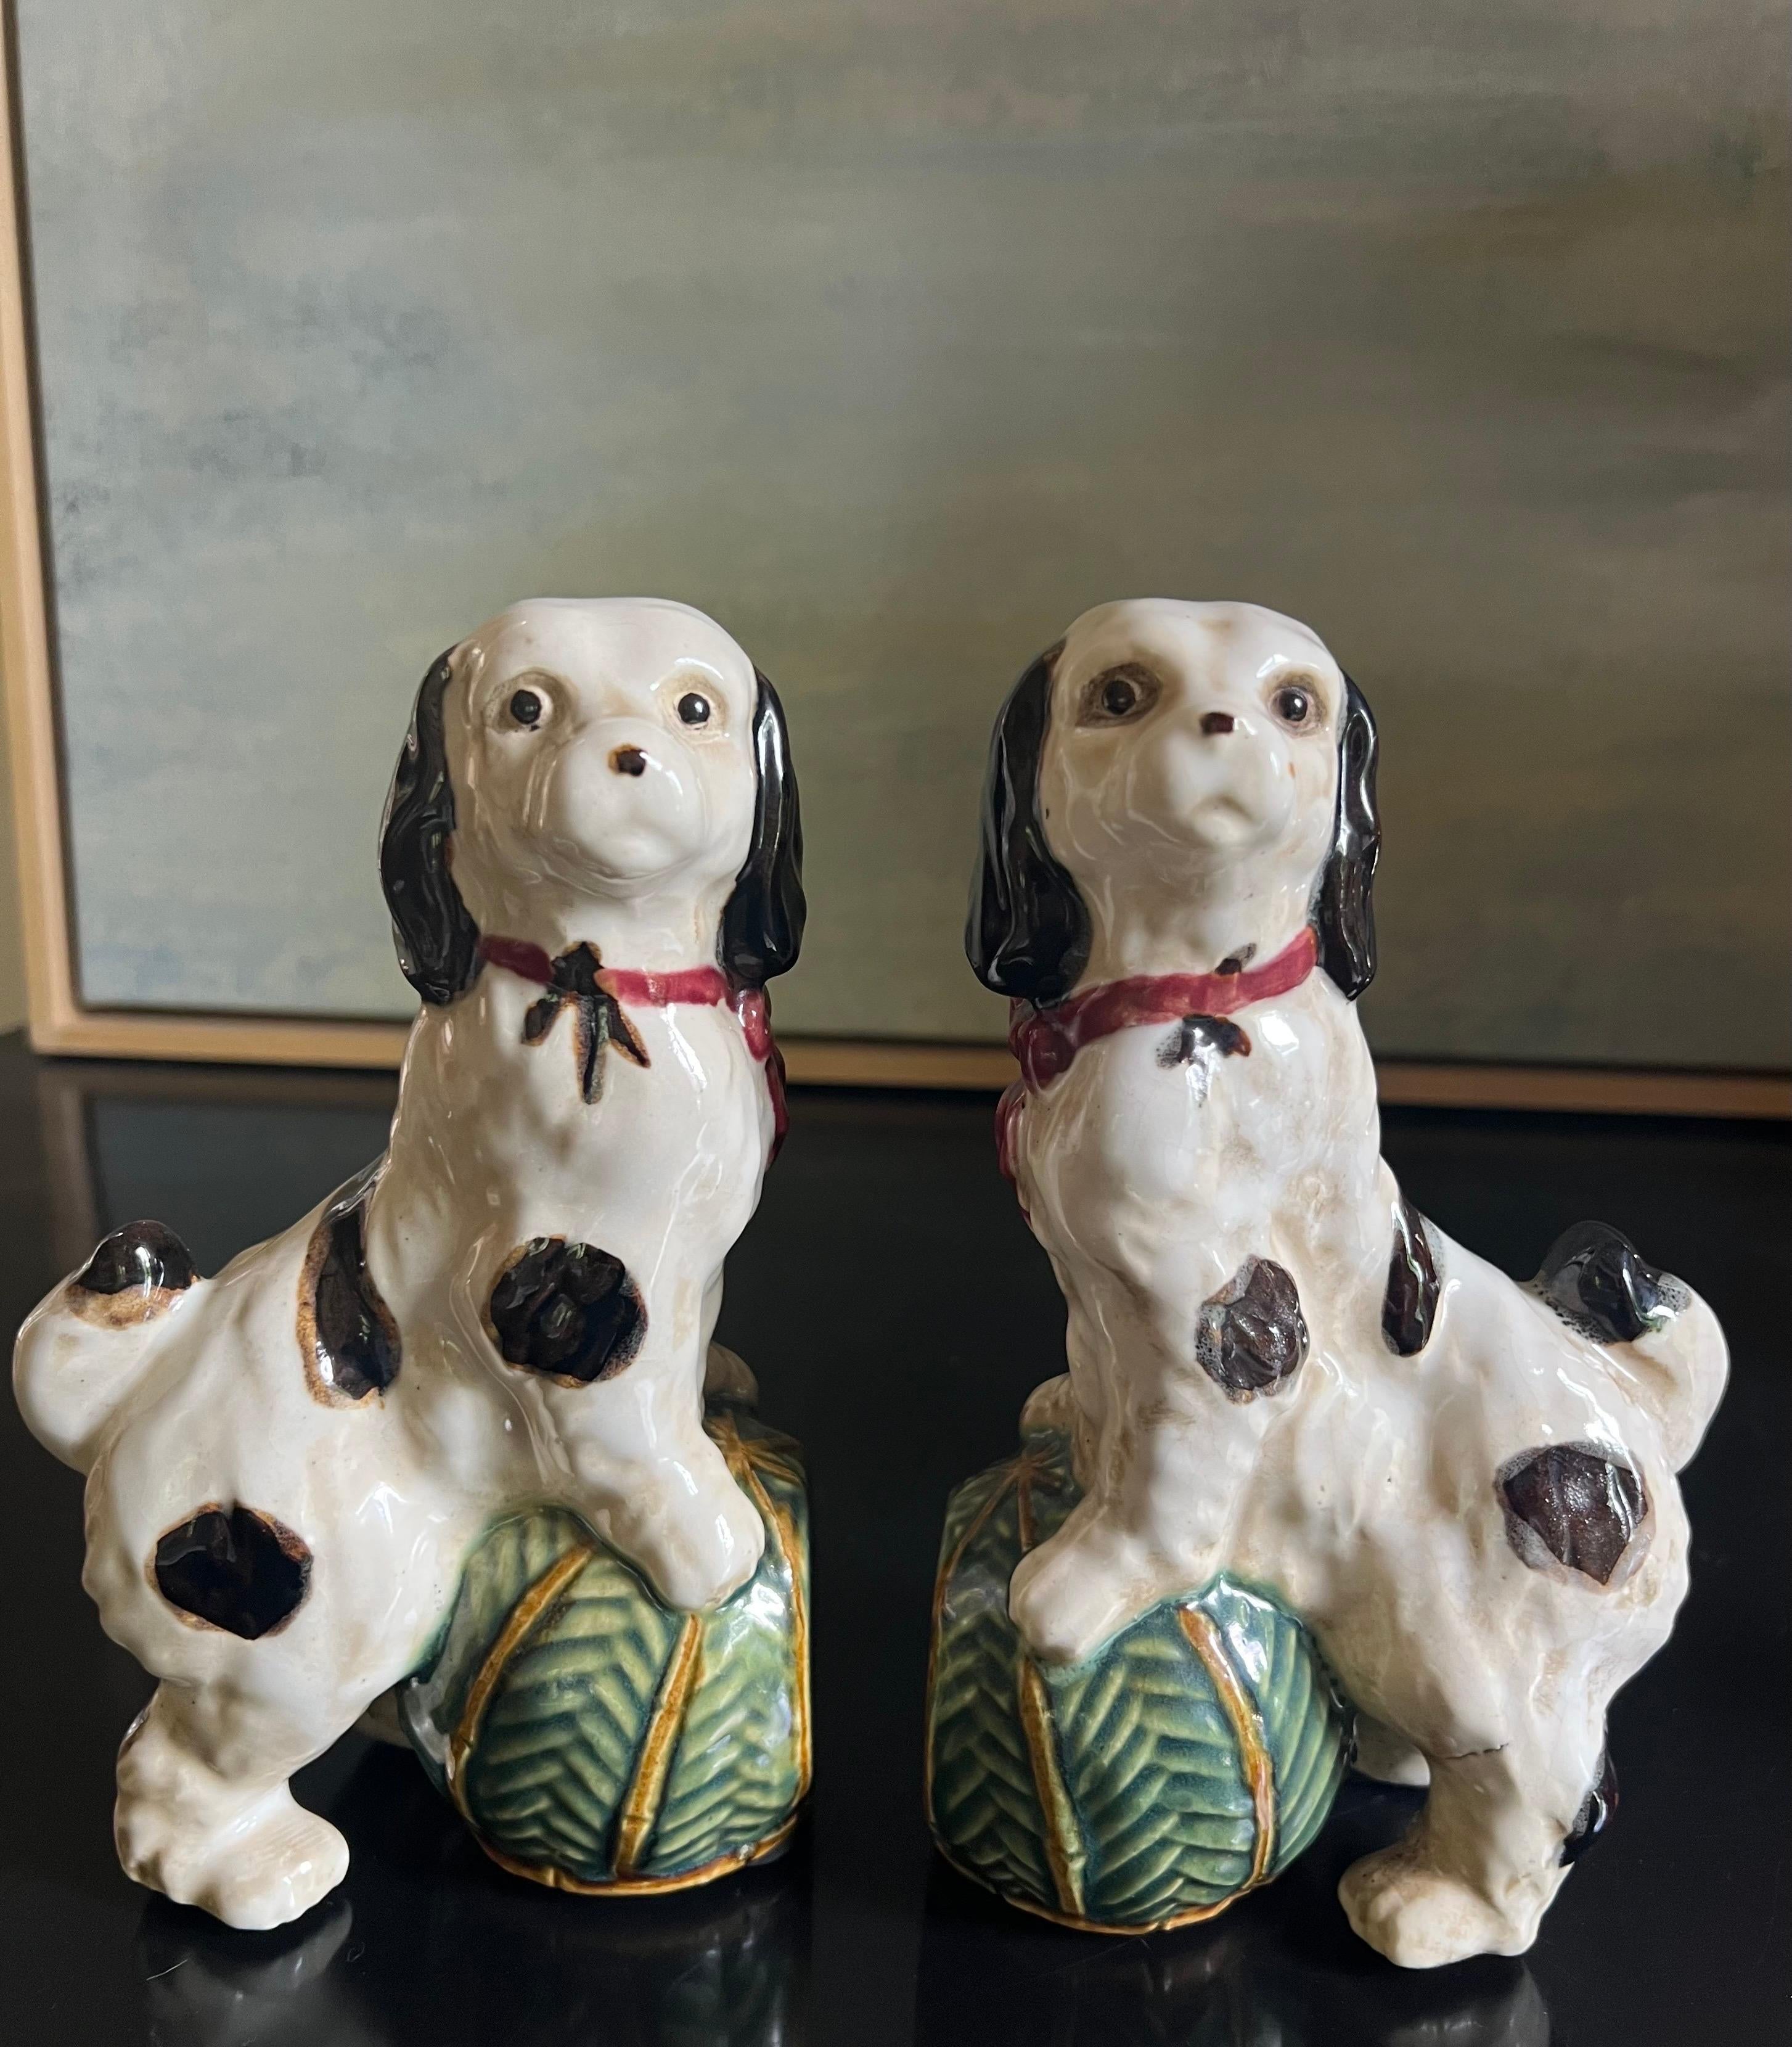 Victorian Ceramic Painted English Cavalier Dog Bookends - a Pair, C. 1940s